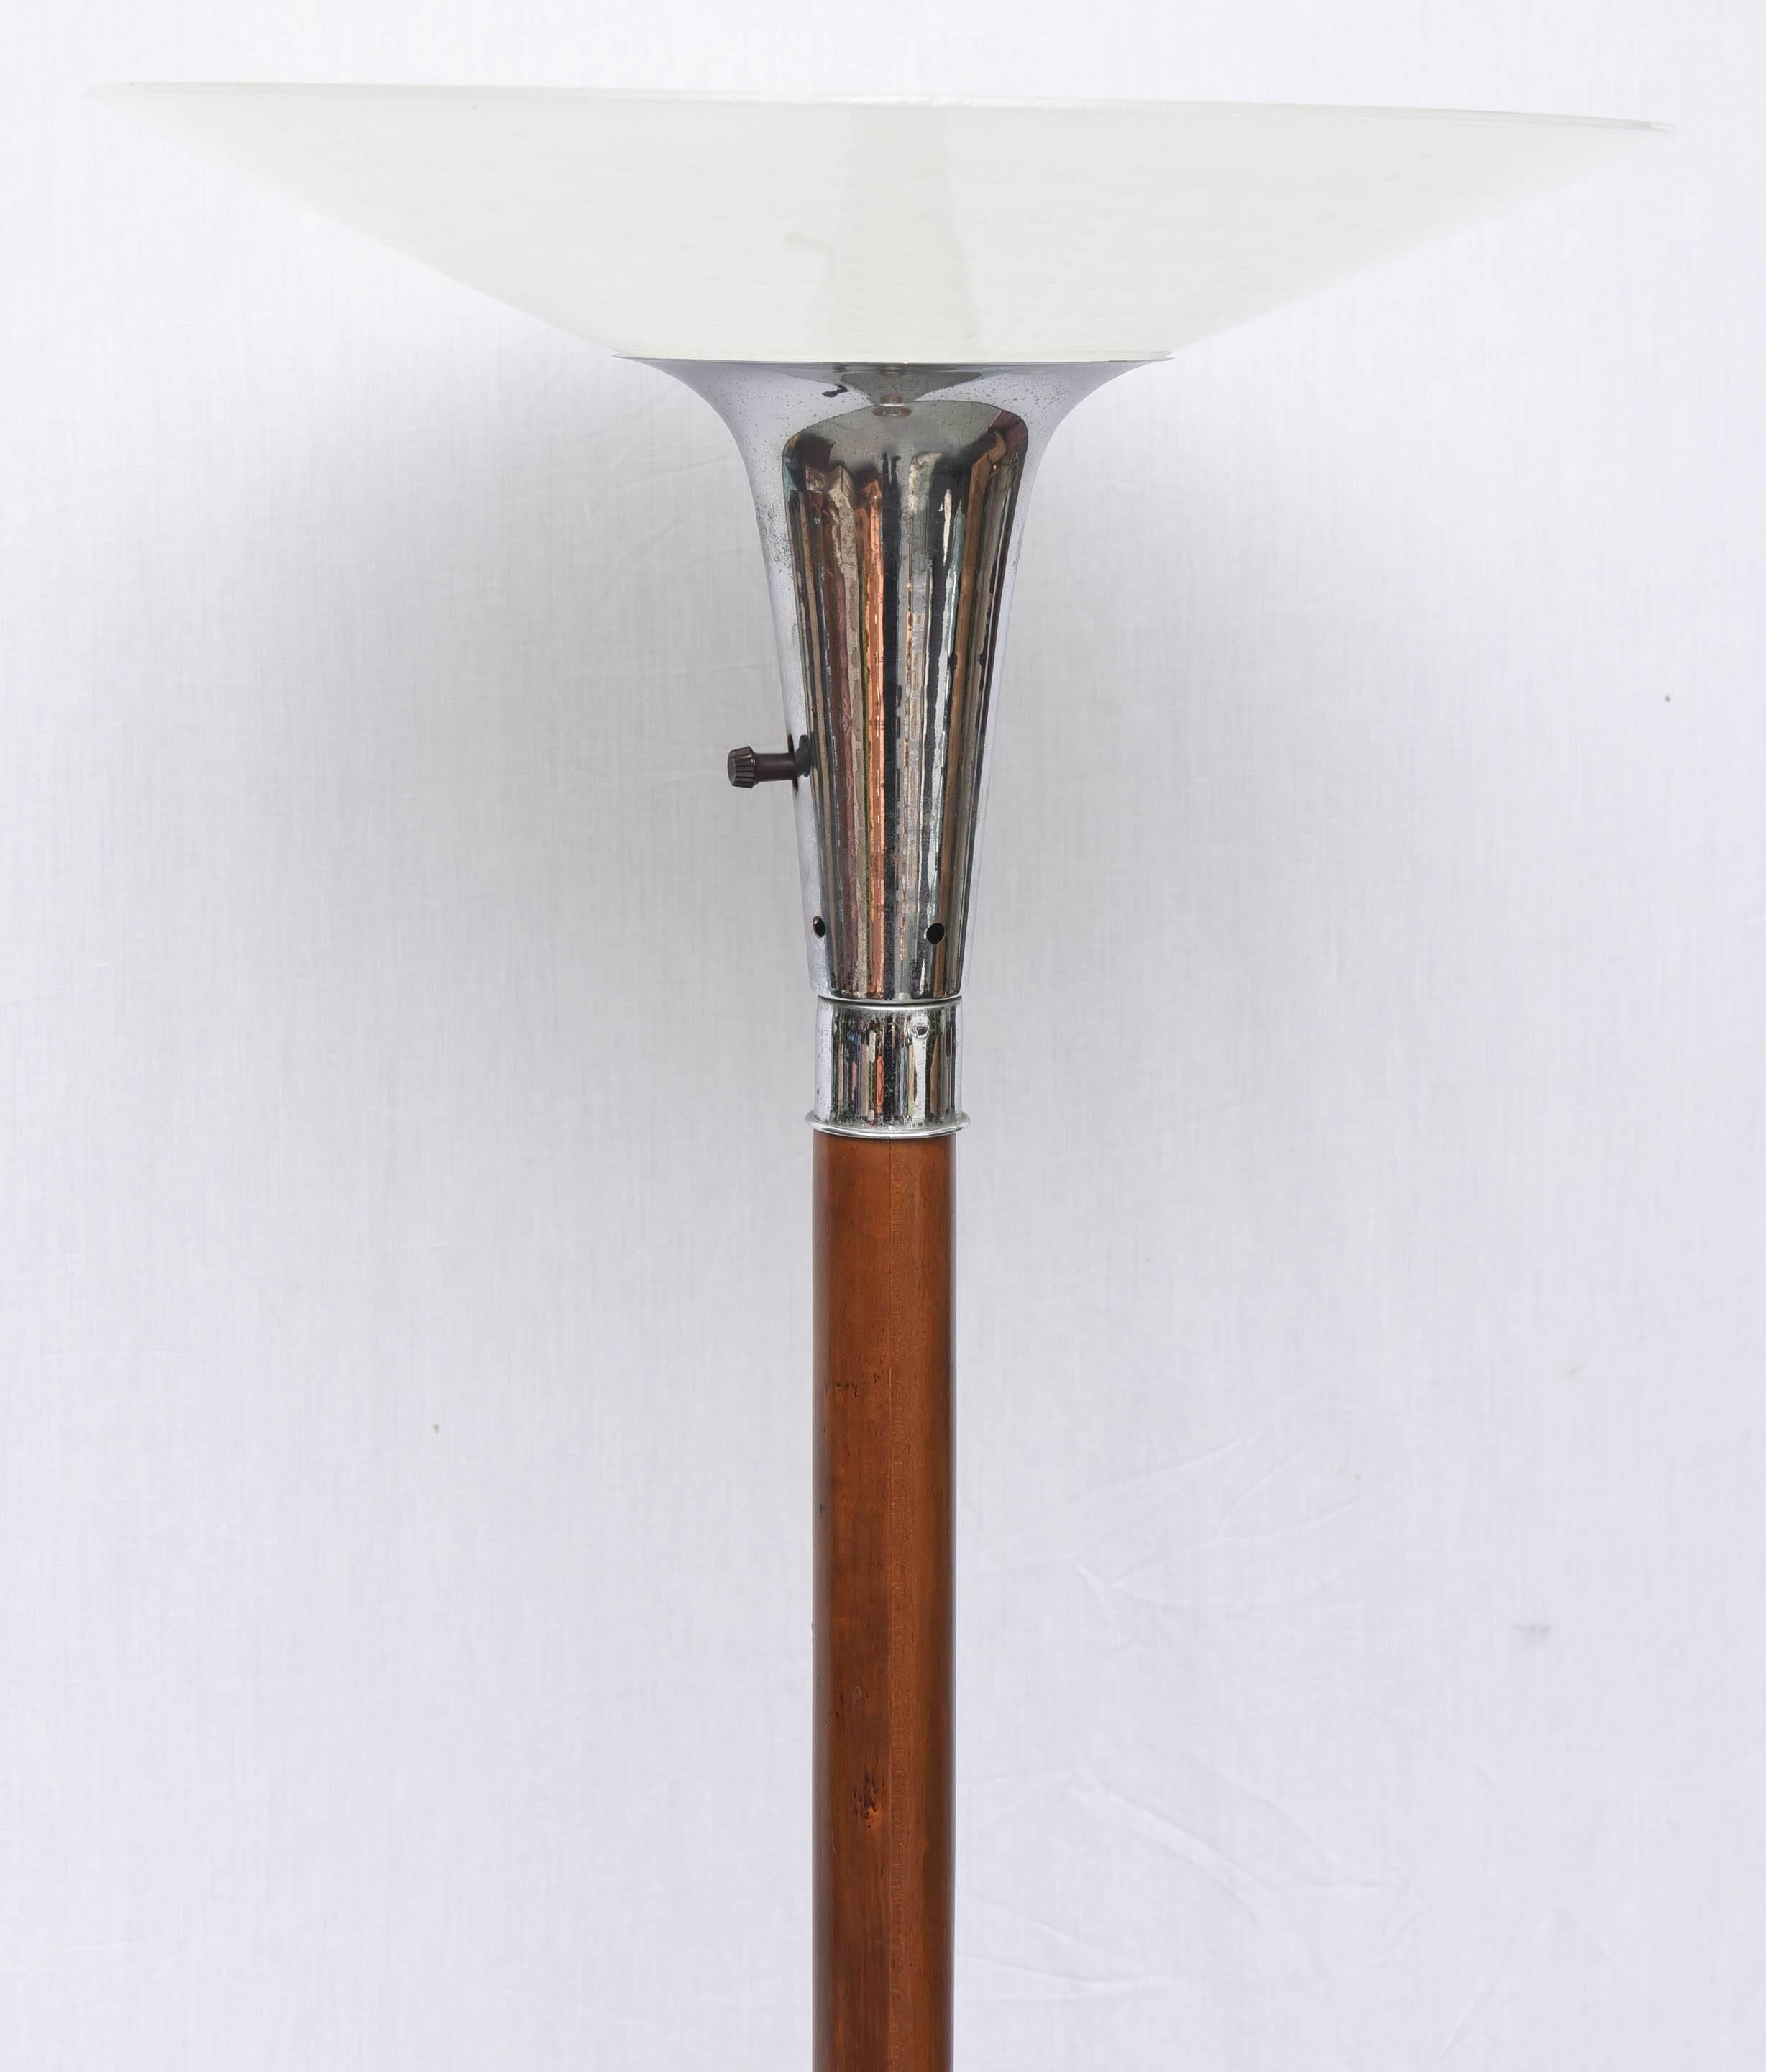 Beautiful wood with chrome accents and glass shade torchiere or floor lamp, USA, 1940s.